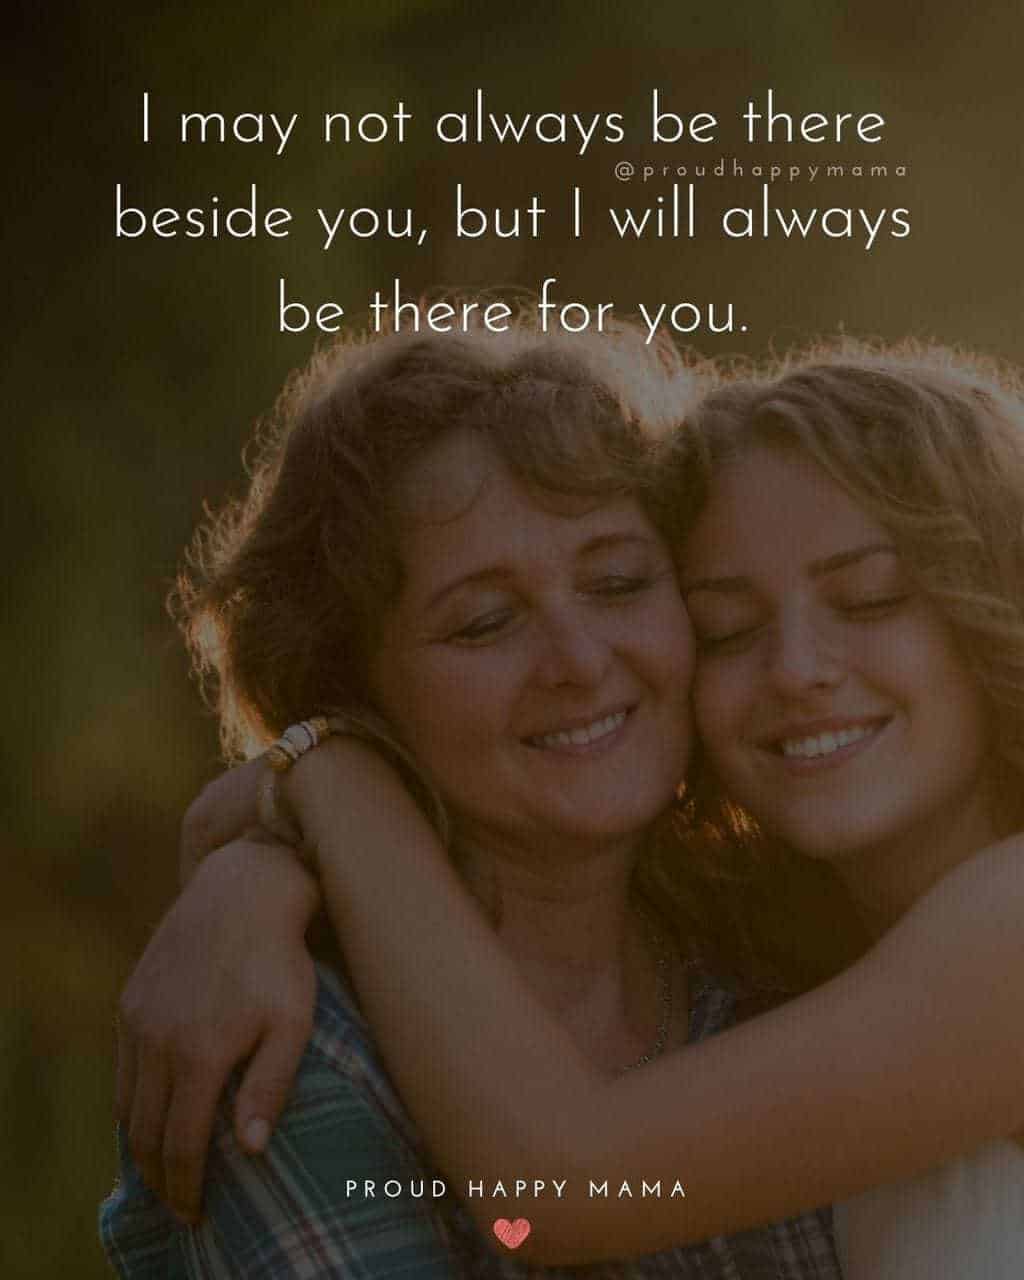 Niece Quotes - I may not always be there beside you, but I will always be there for you.